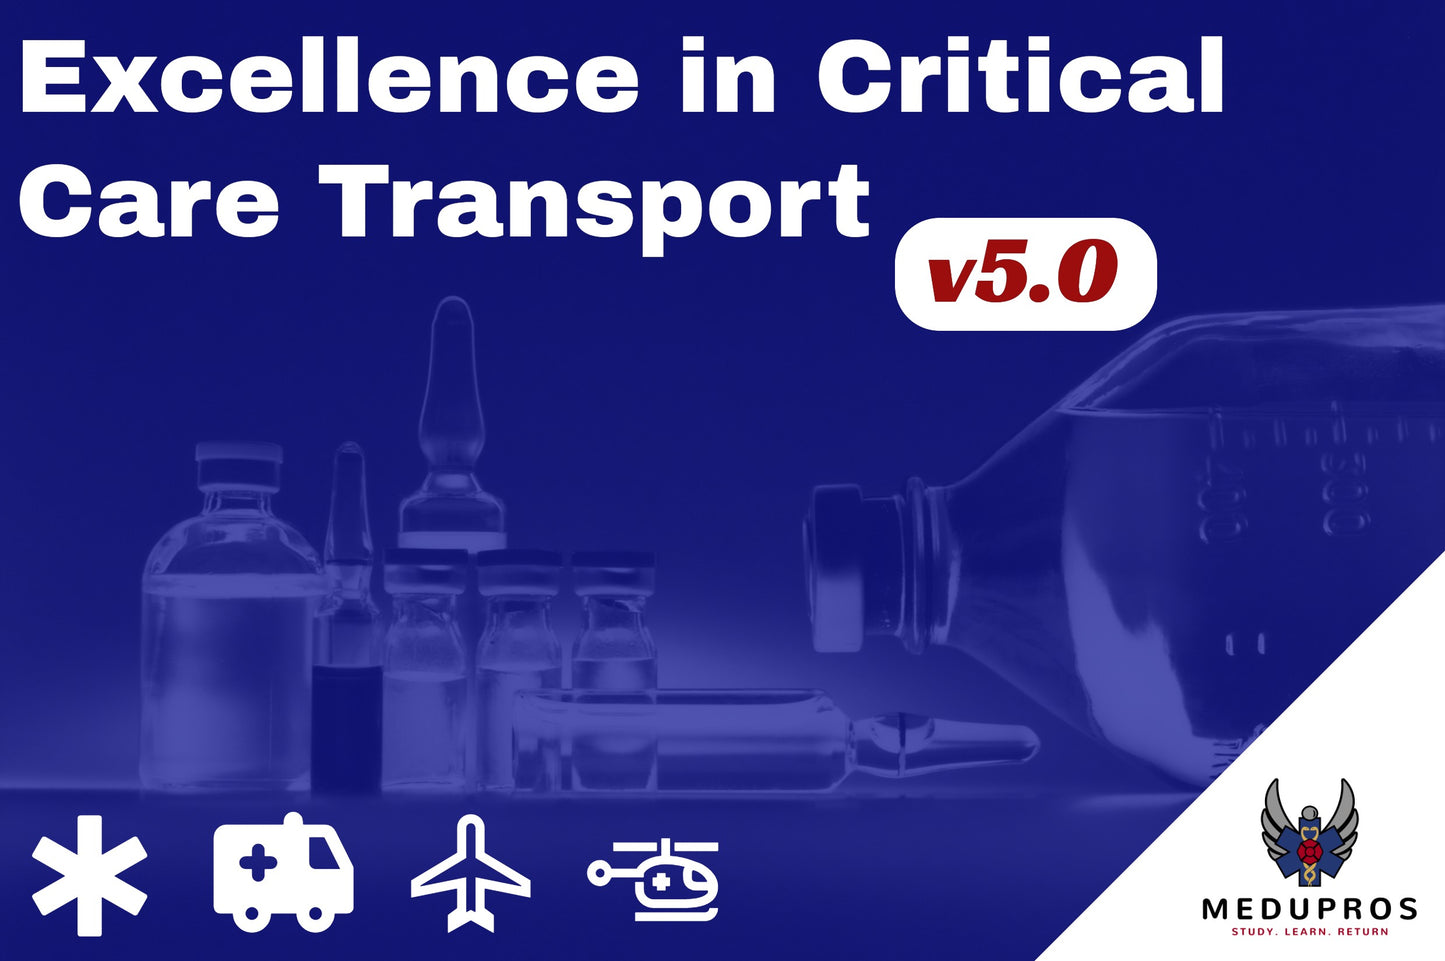 Excellence in Critical Care Transport